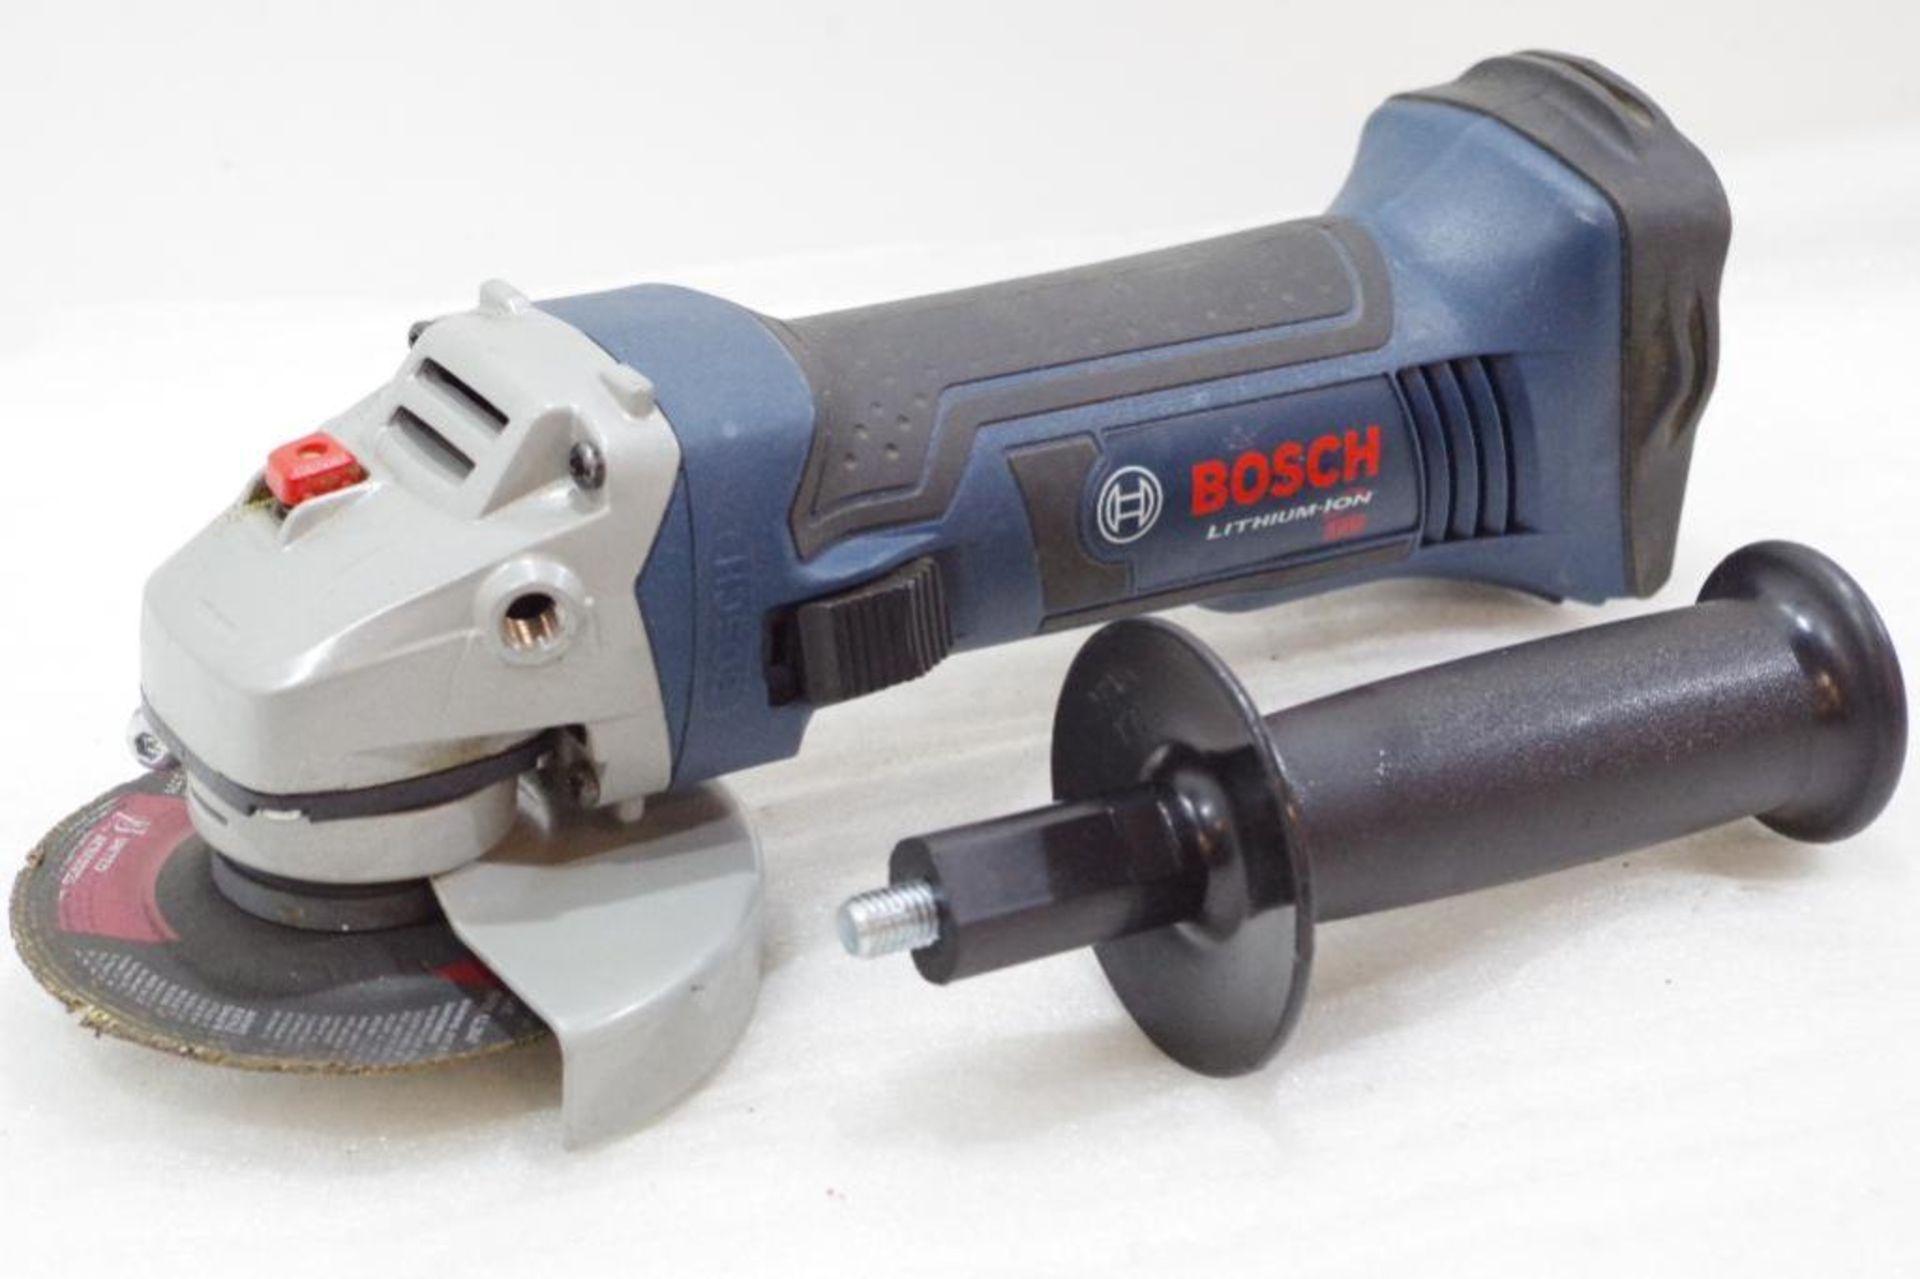 BOSCH 18V Cordless 4-1/2" Angle Grinder M/N CAG180 w/ Side Handle (NO Battery)